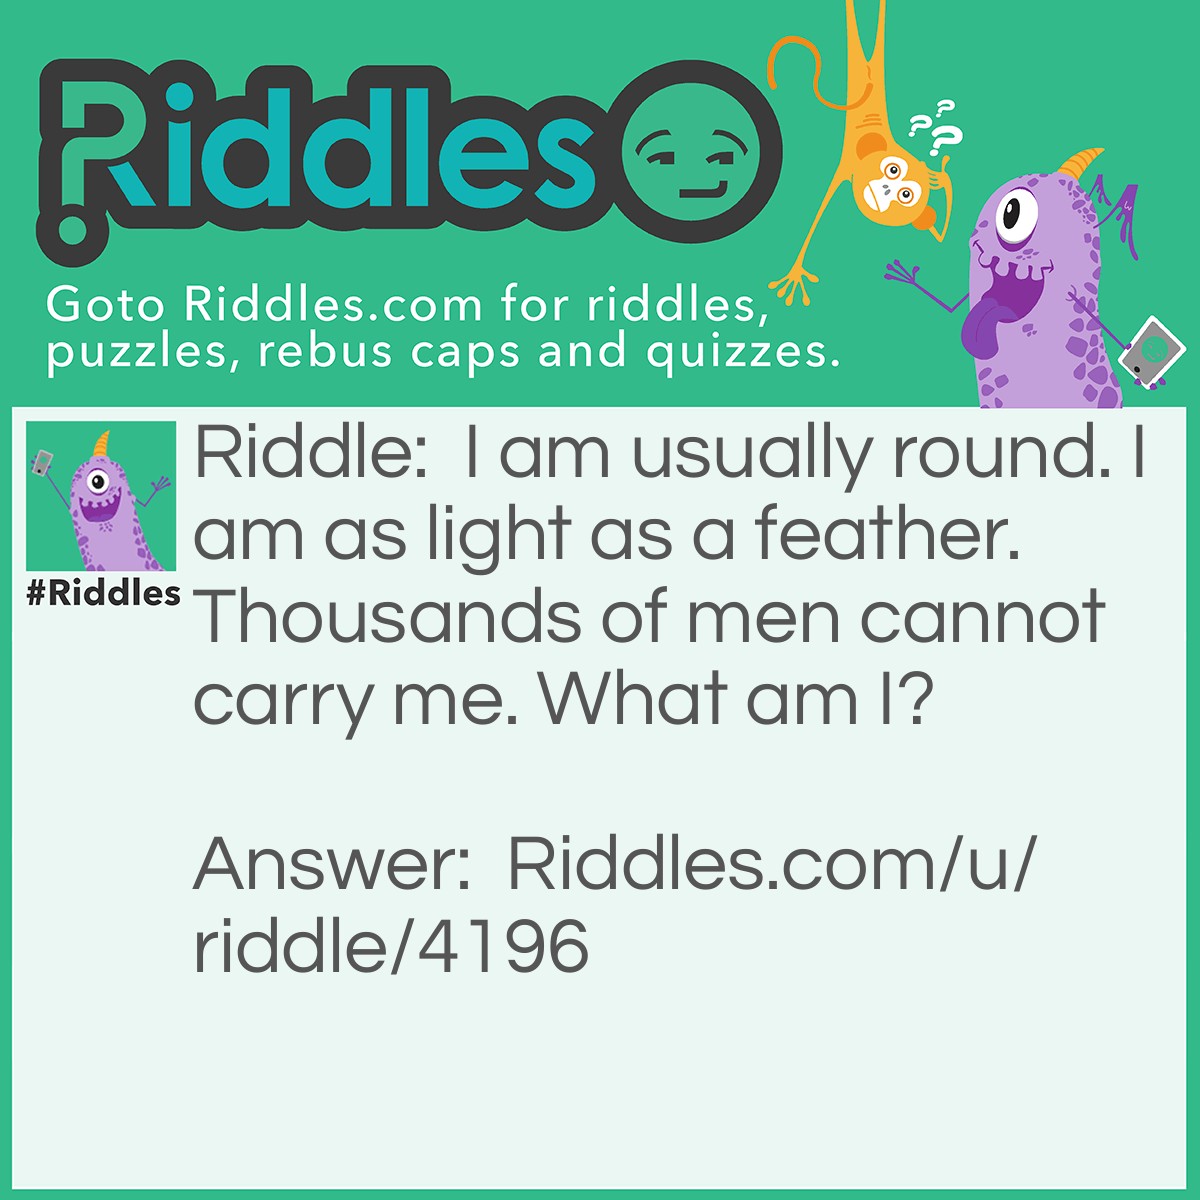 Riddle: I am usually round. I am as light as a feather. Thousands of men cannot carry me. What am I? Answer: Bubbles.